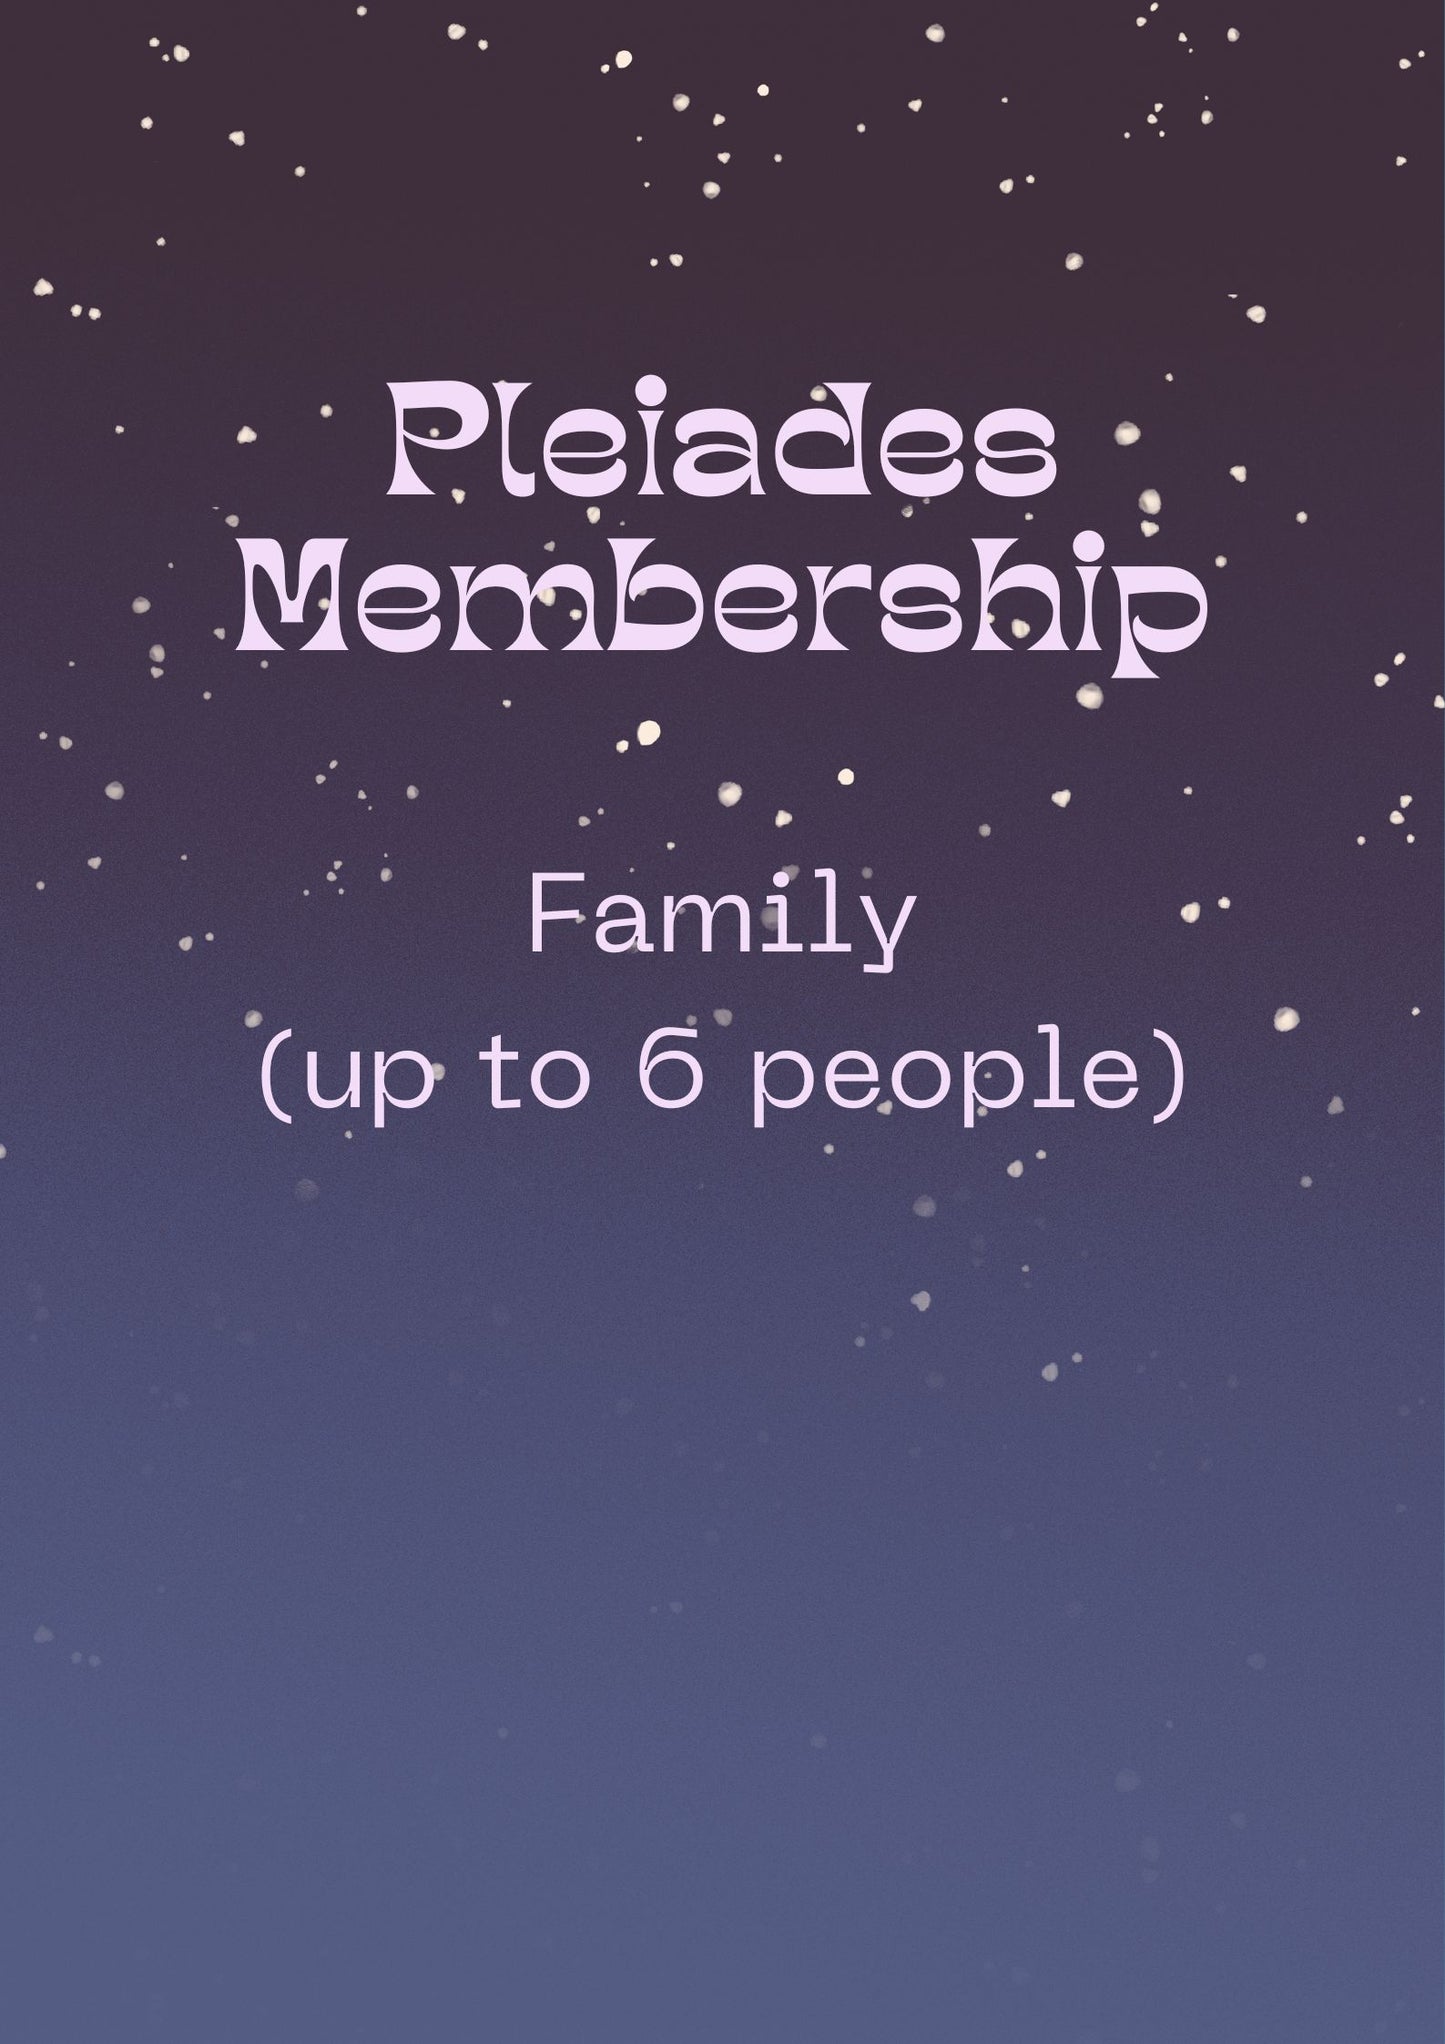 Membership: Pleiades (Family with up to 6 people)